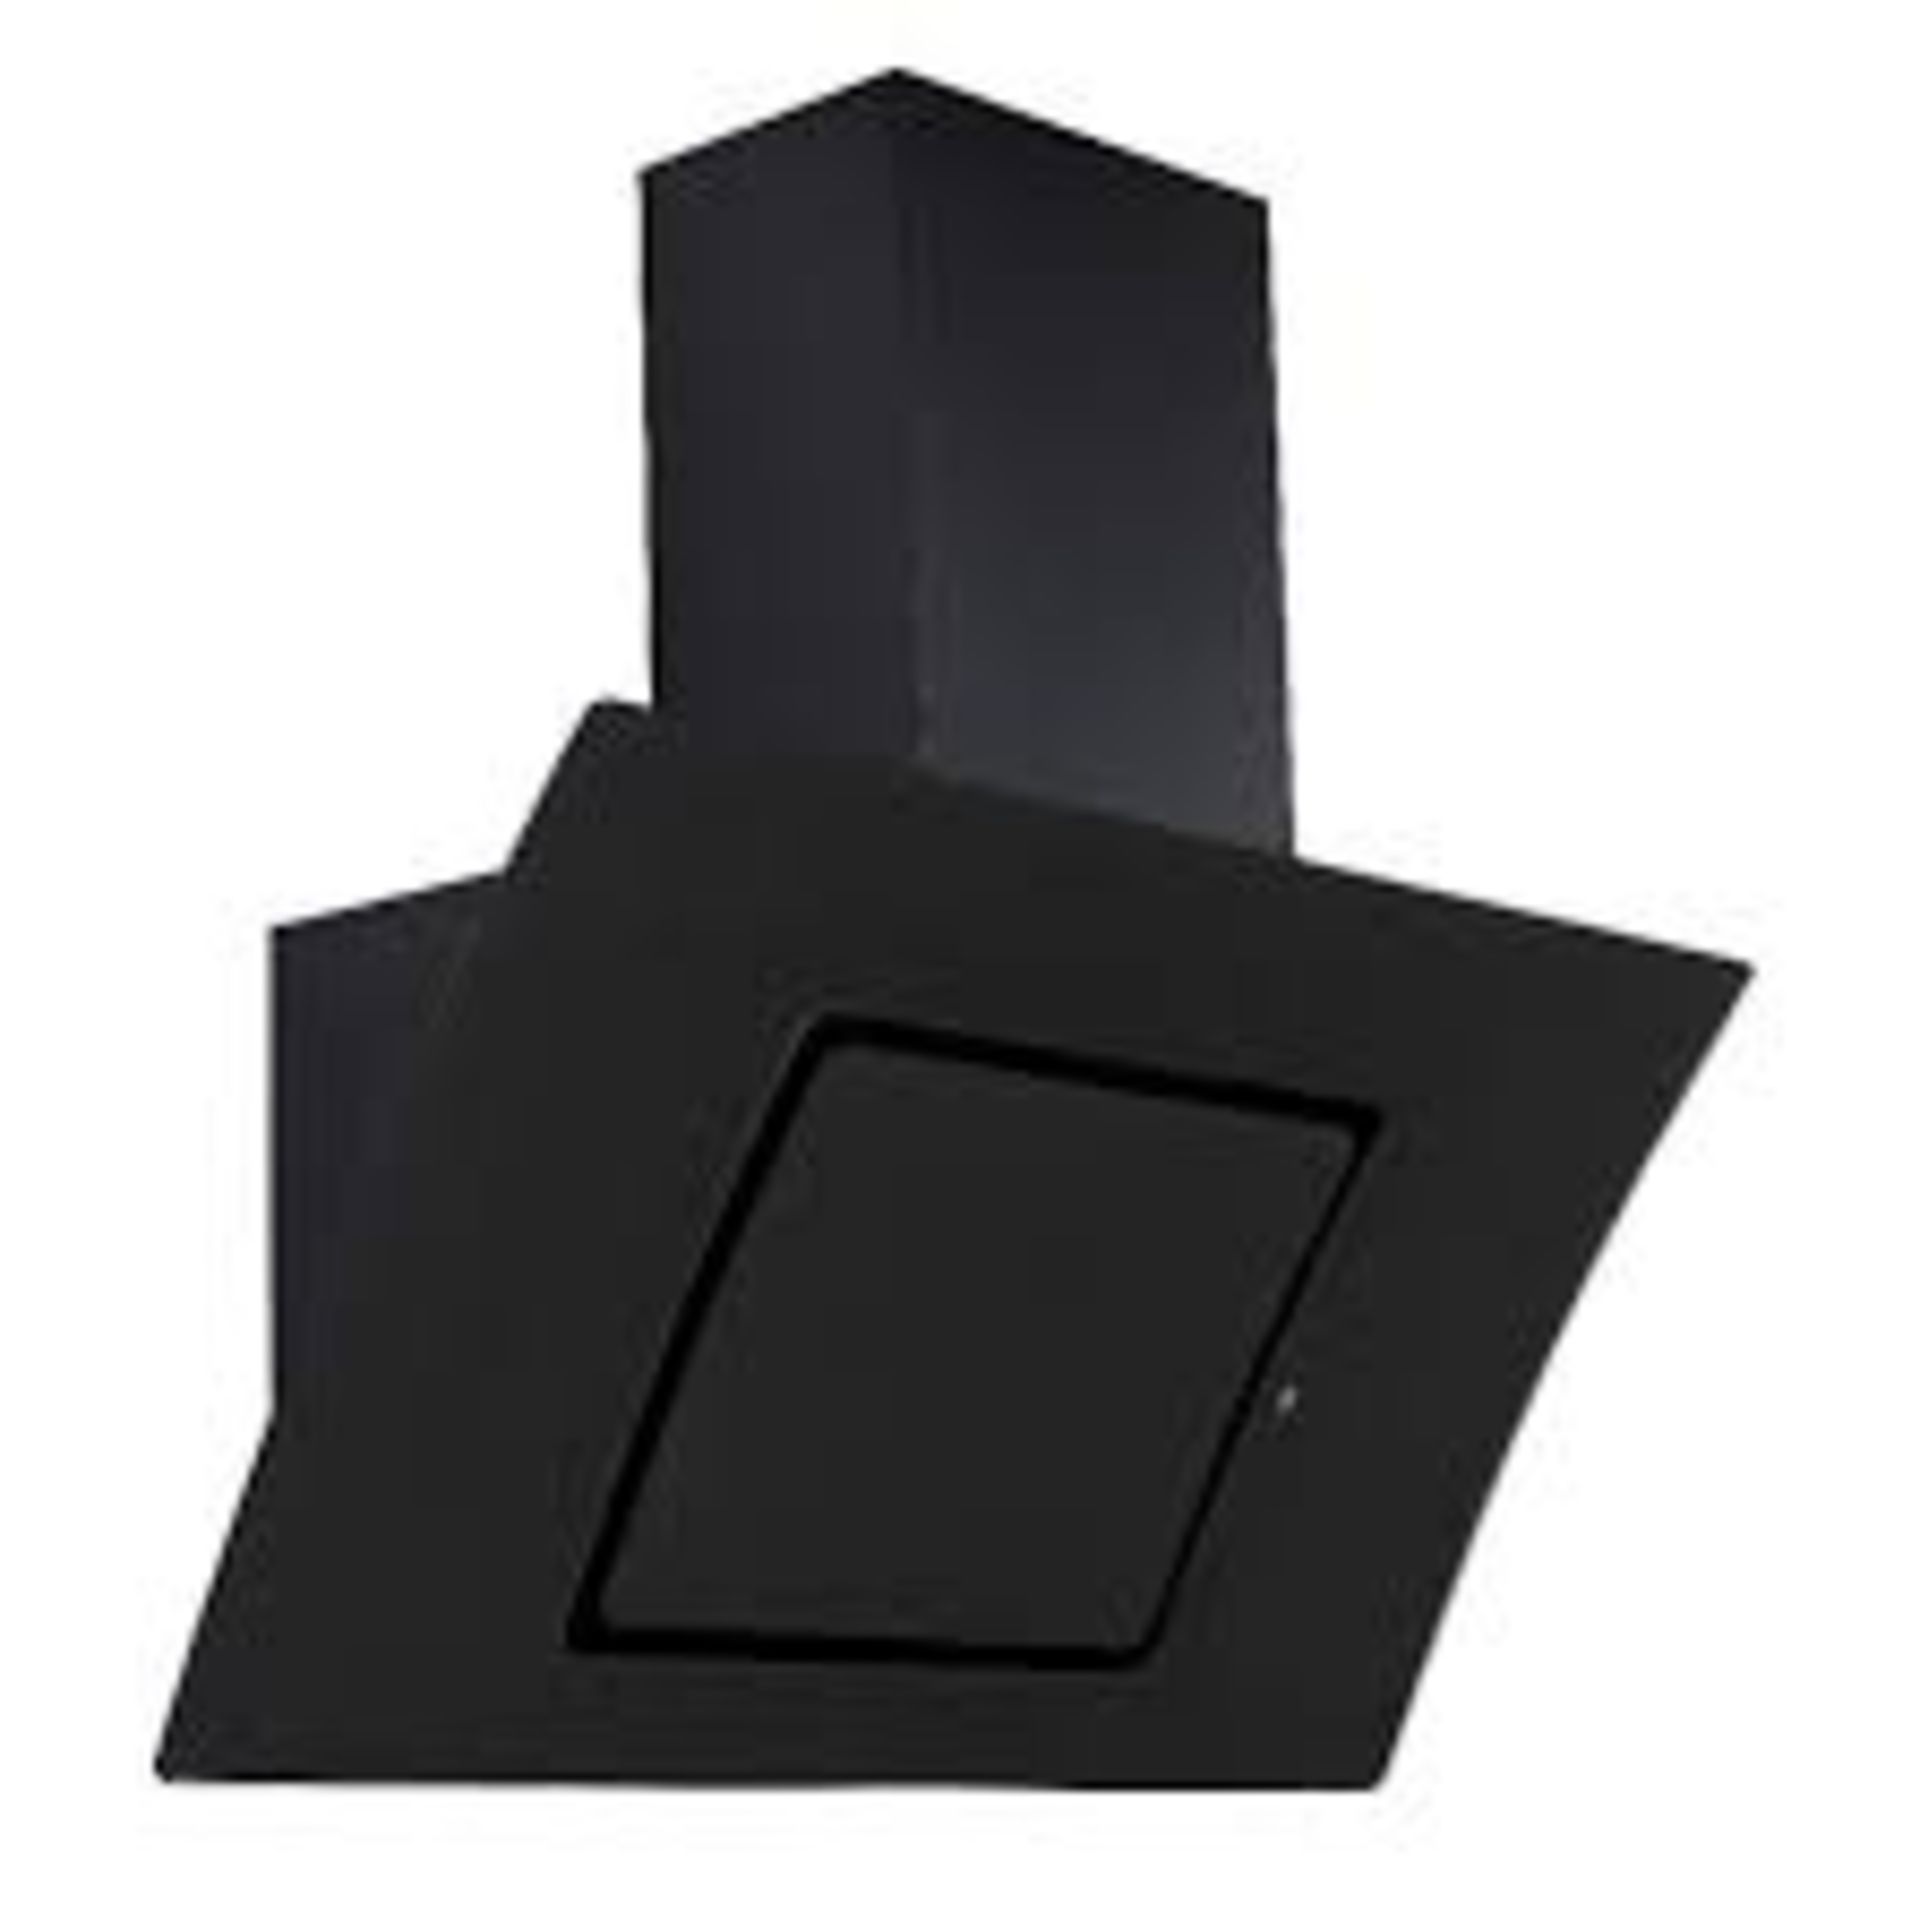 Boxed UBCR70BK 70cm Black Glass Angled Cooker Hood (Public Viewing and Appraisals Available)